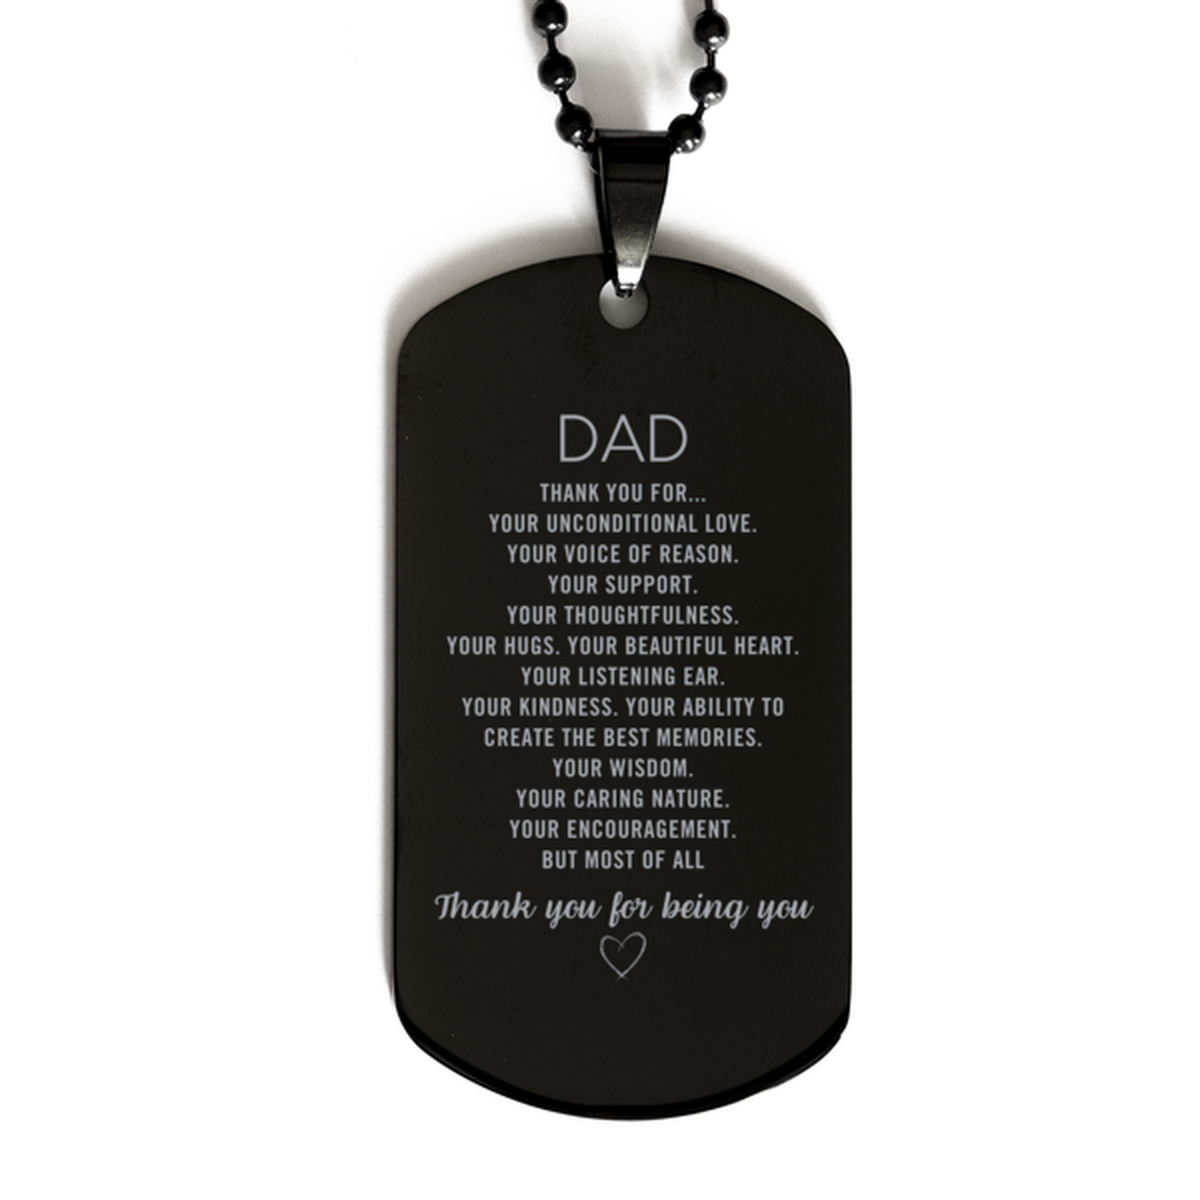 Dad Black Dog Tag Custom, Engraved Gifts For Dad Christmas Graduation Birthday Gifts for Men Women Dad Thank you for Your unconditional love